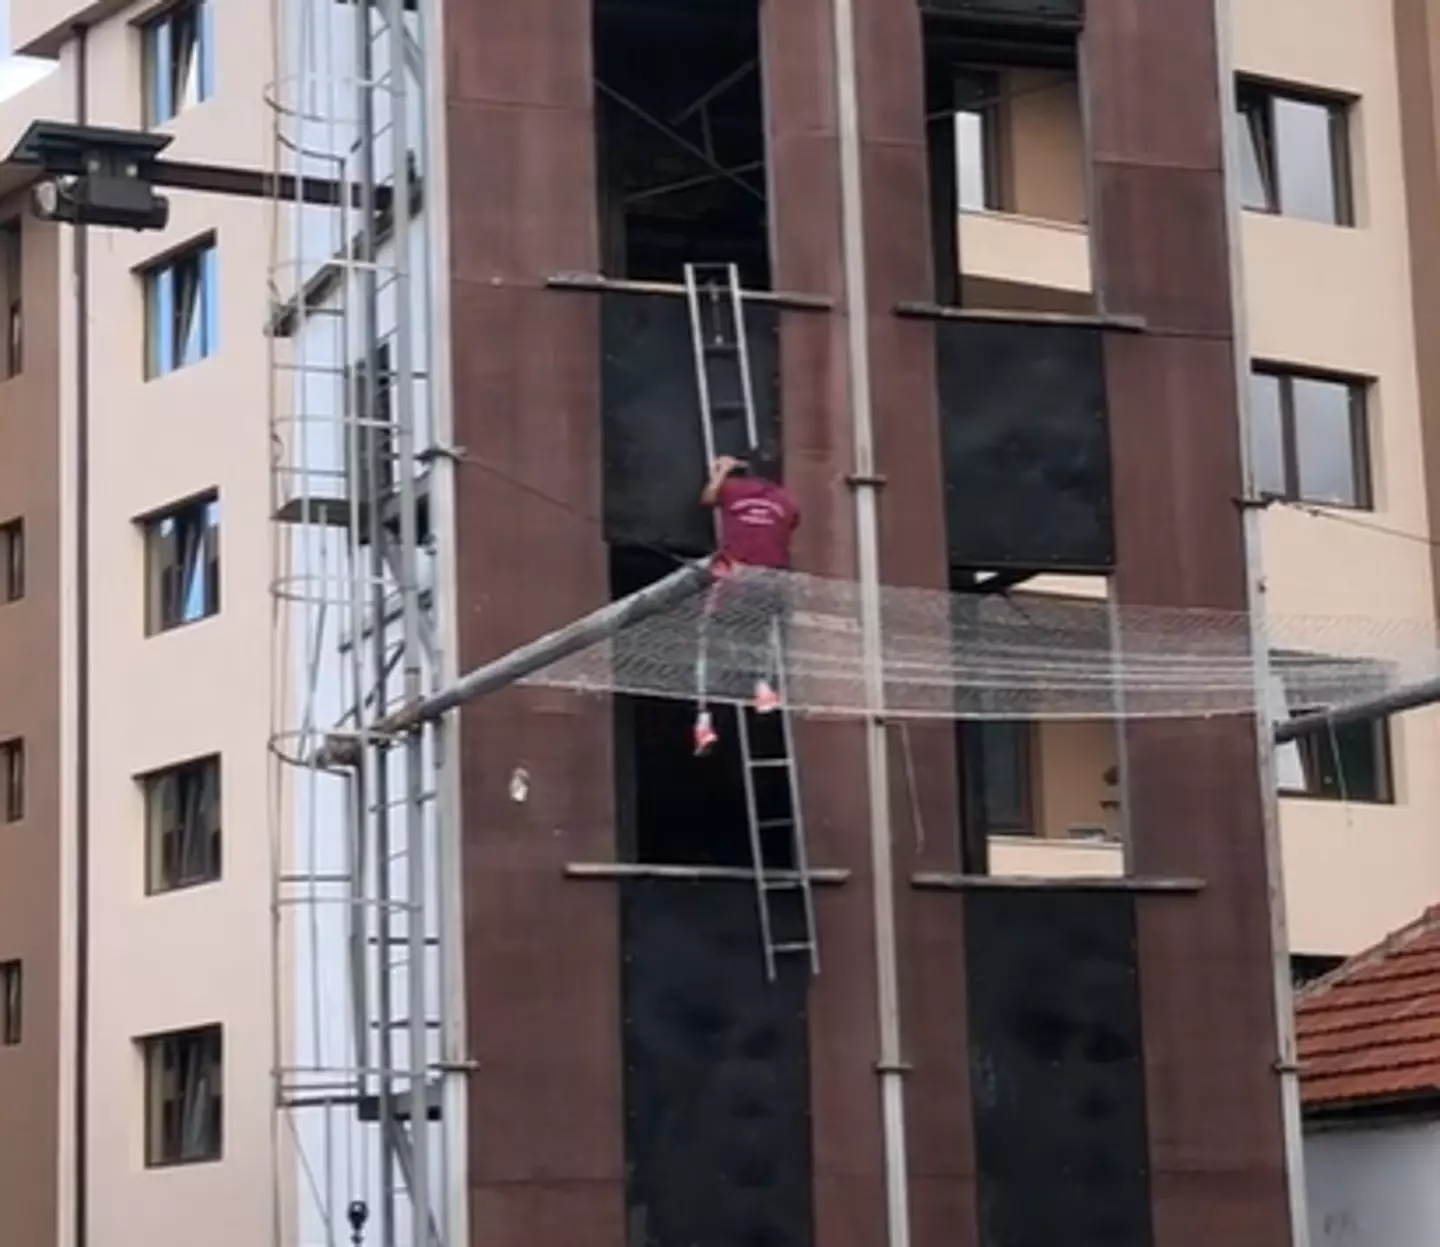 Firefighter showcases his incredible ability. (@ggeorg.iev/TikTok)